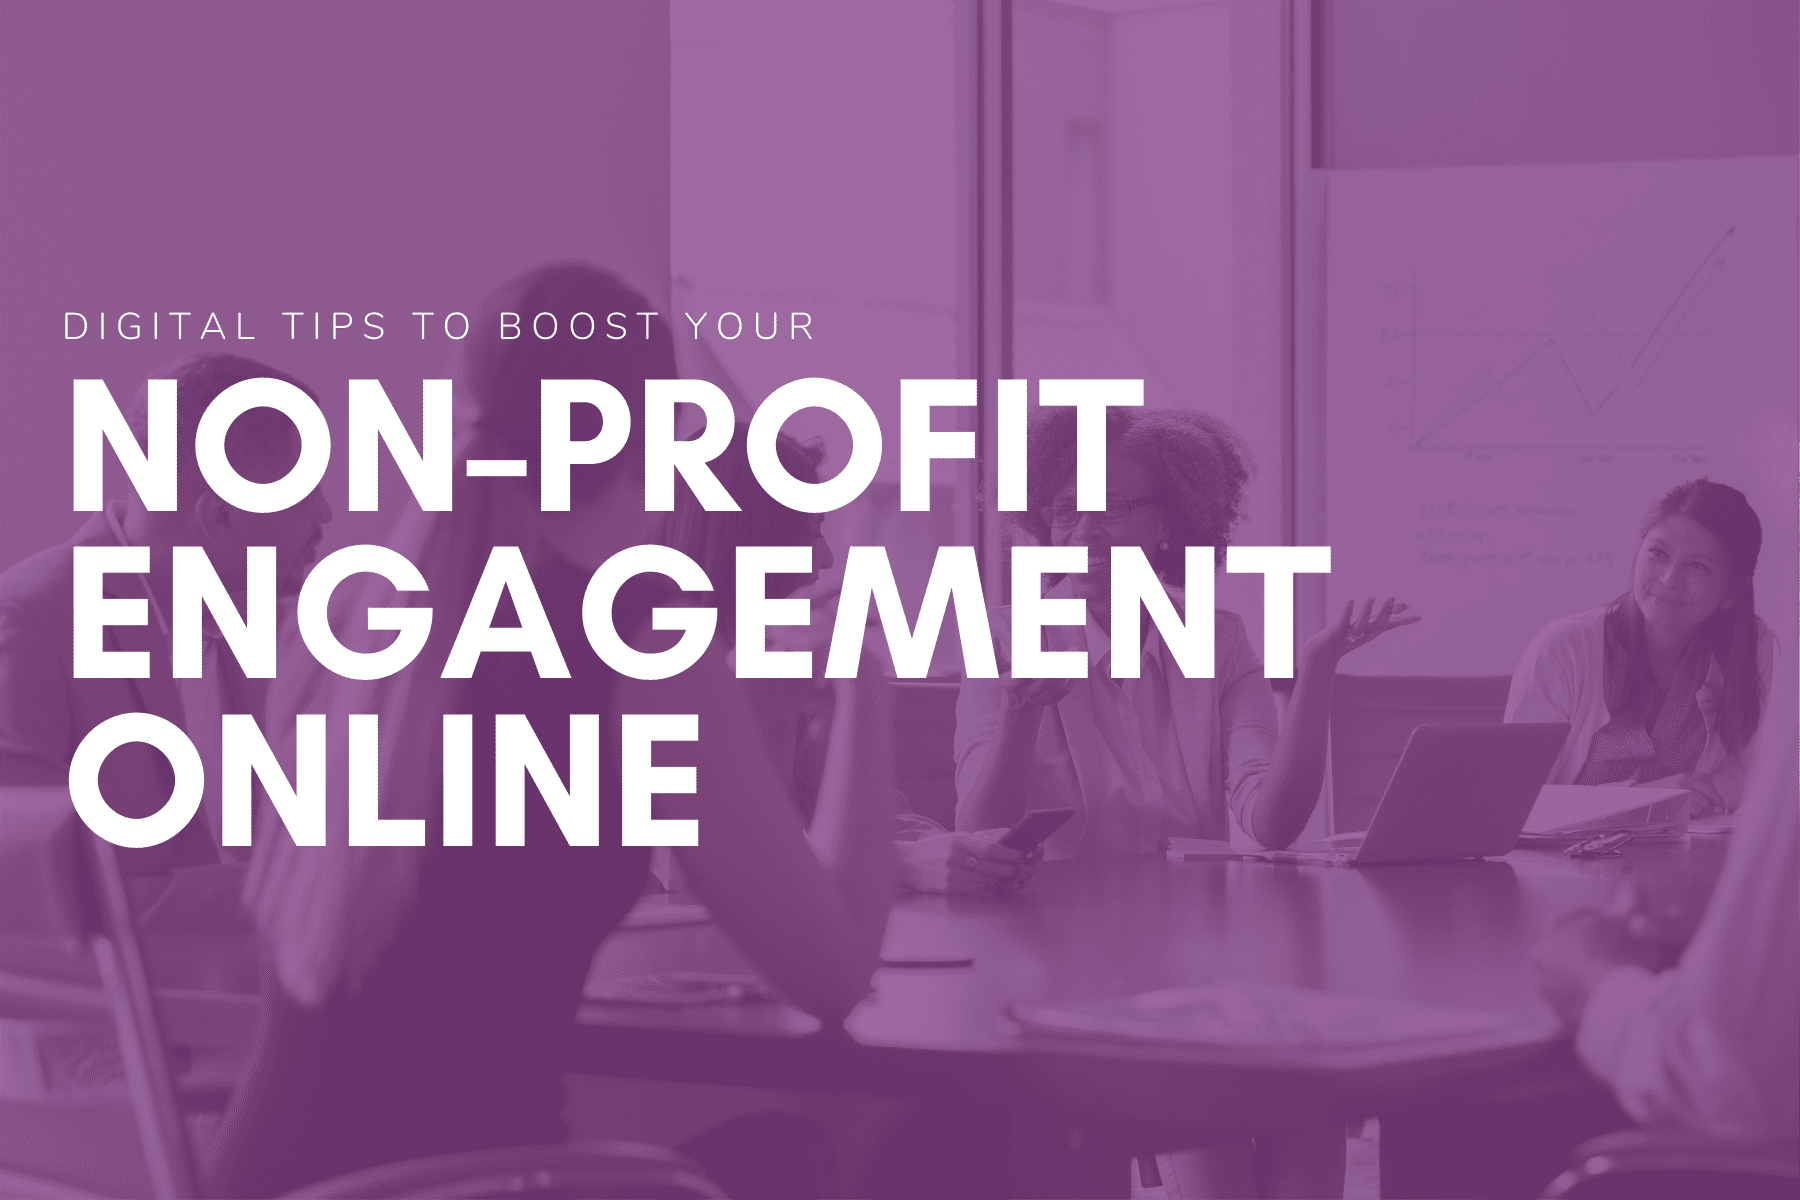 Digital Tips to boost your Non-profit's engagement online